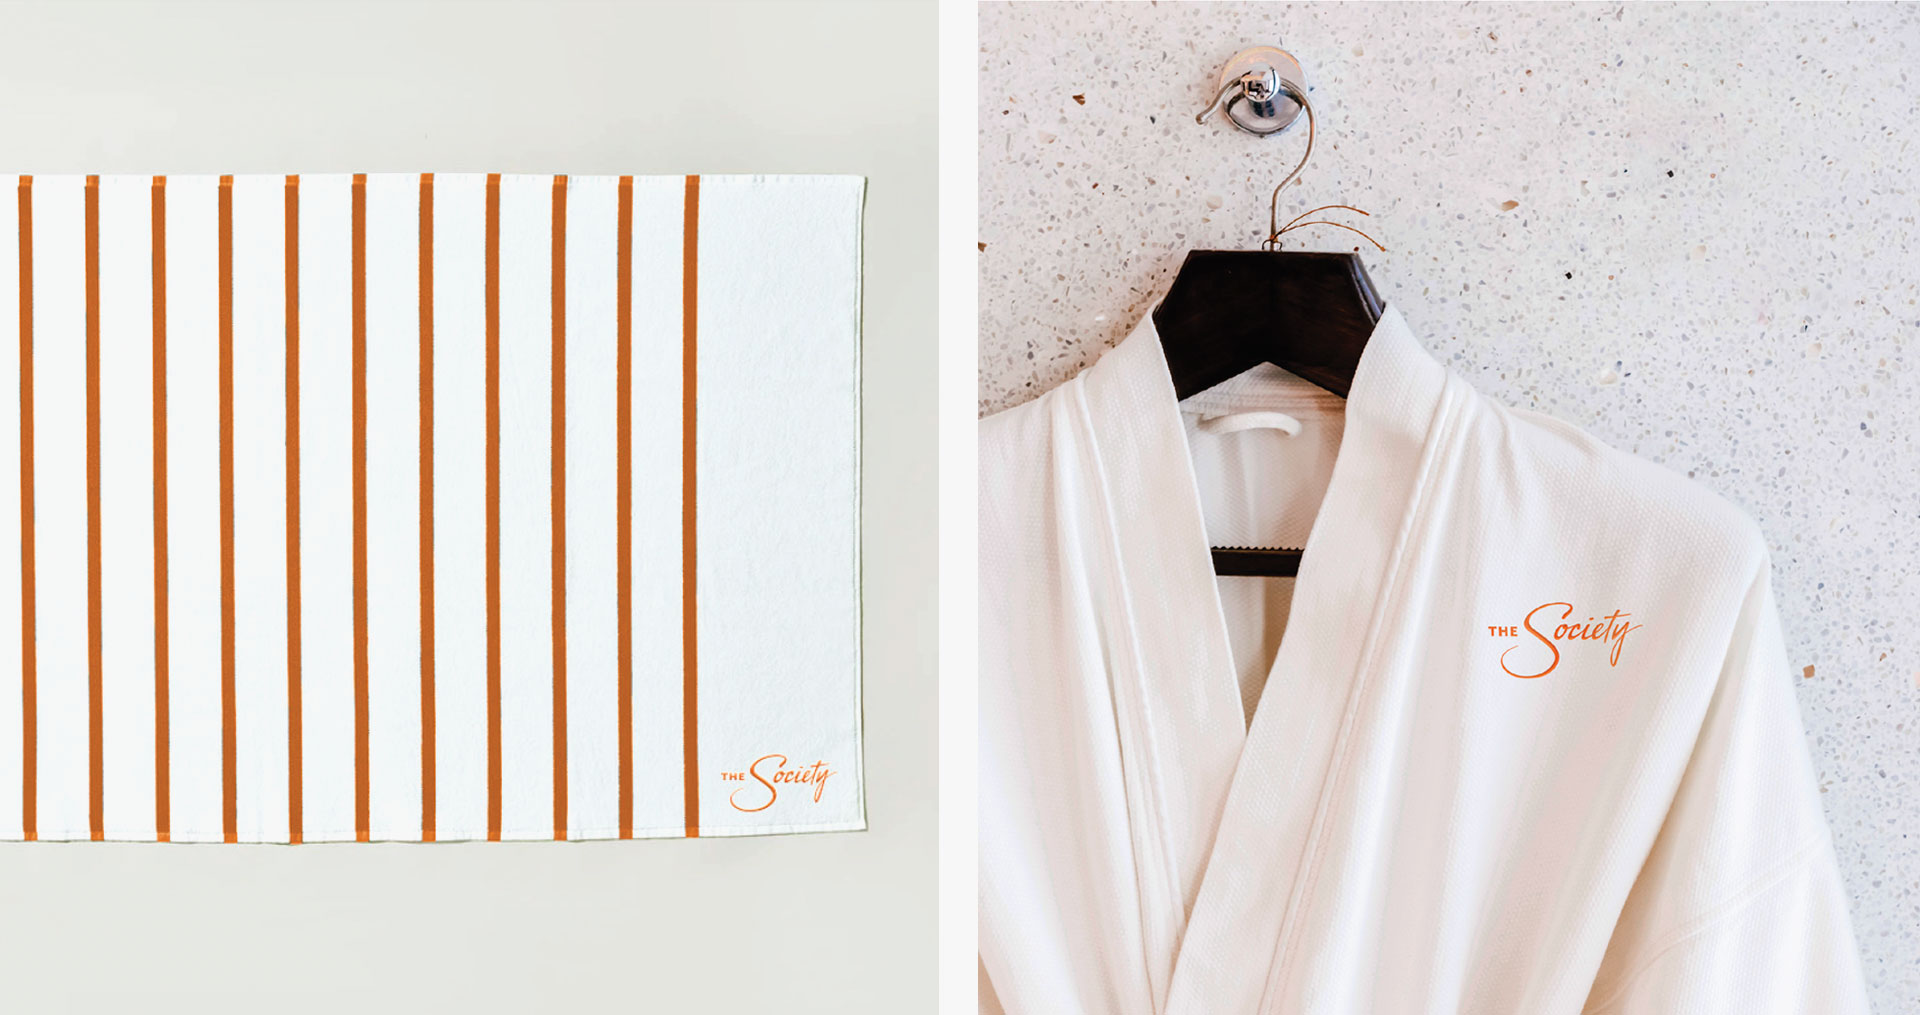 The Society apartments branding towel and robe mockup created by Incubate Design for Holland Residential